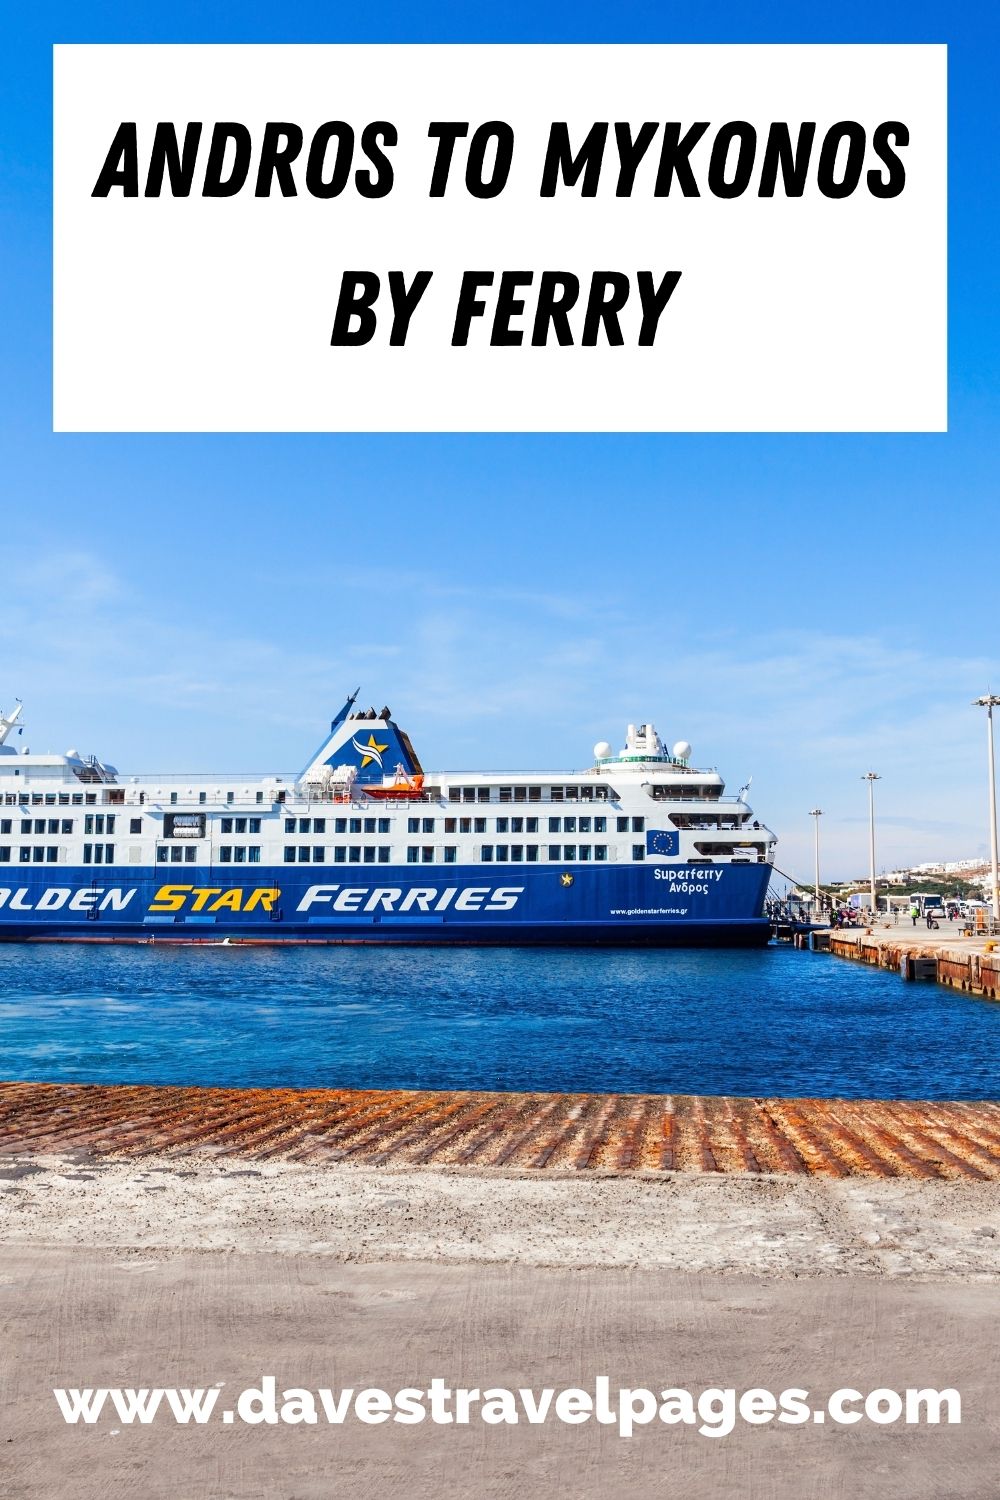 Andros to Mykonos by Ferry